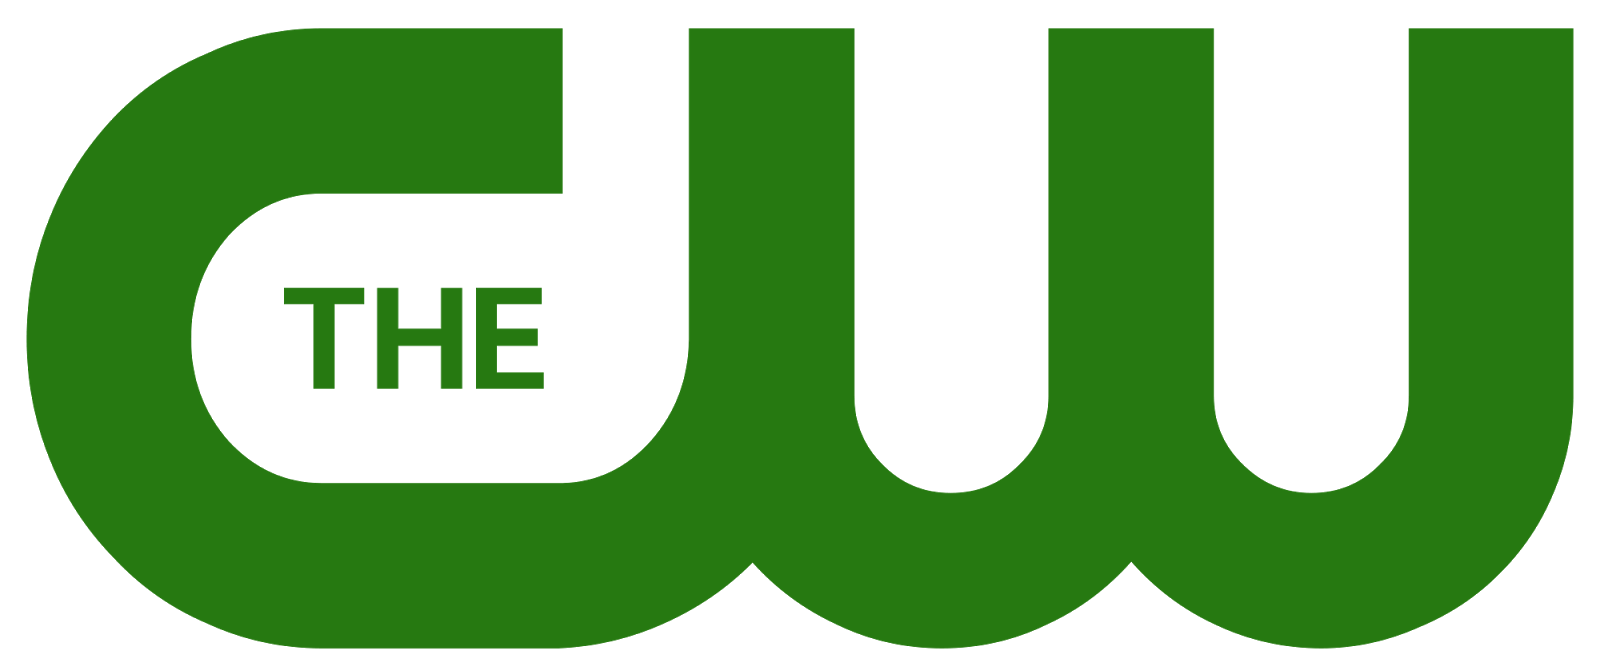 The CW Primetime Press Releases - Various Shows -  For the Week of November 3